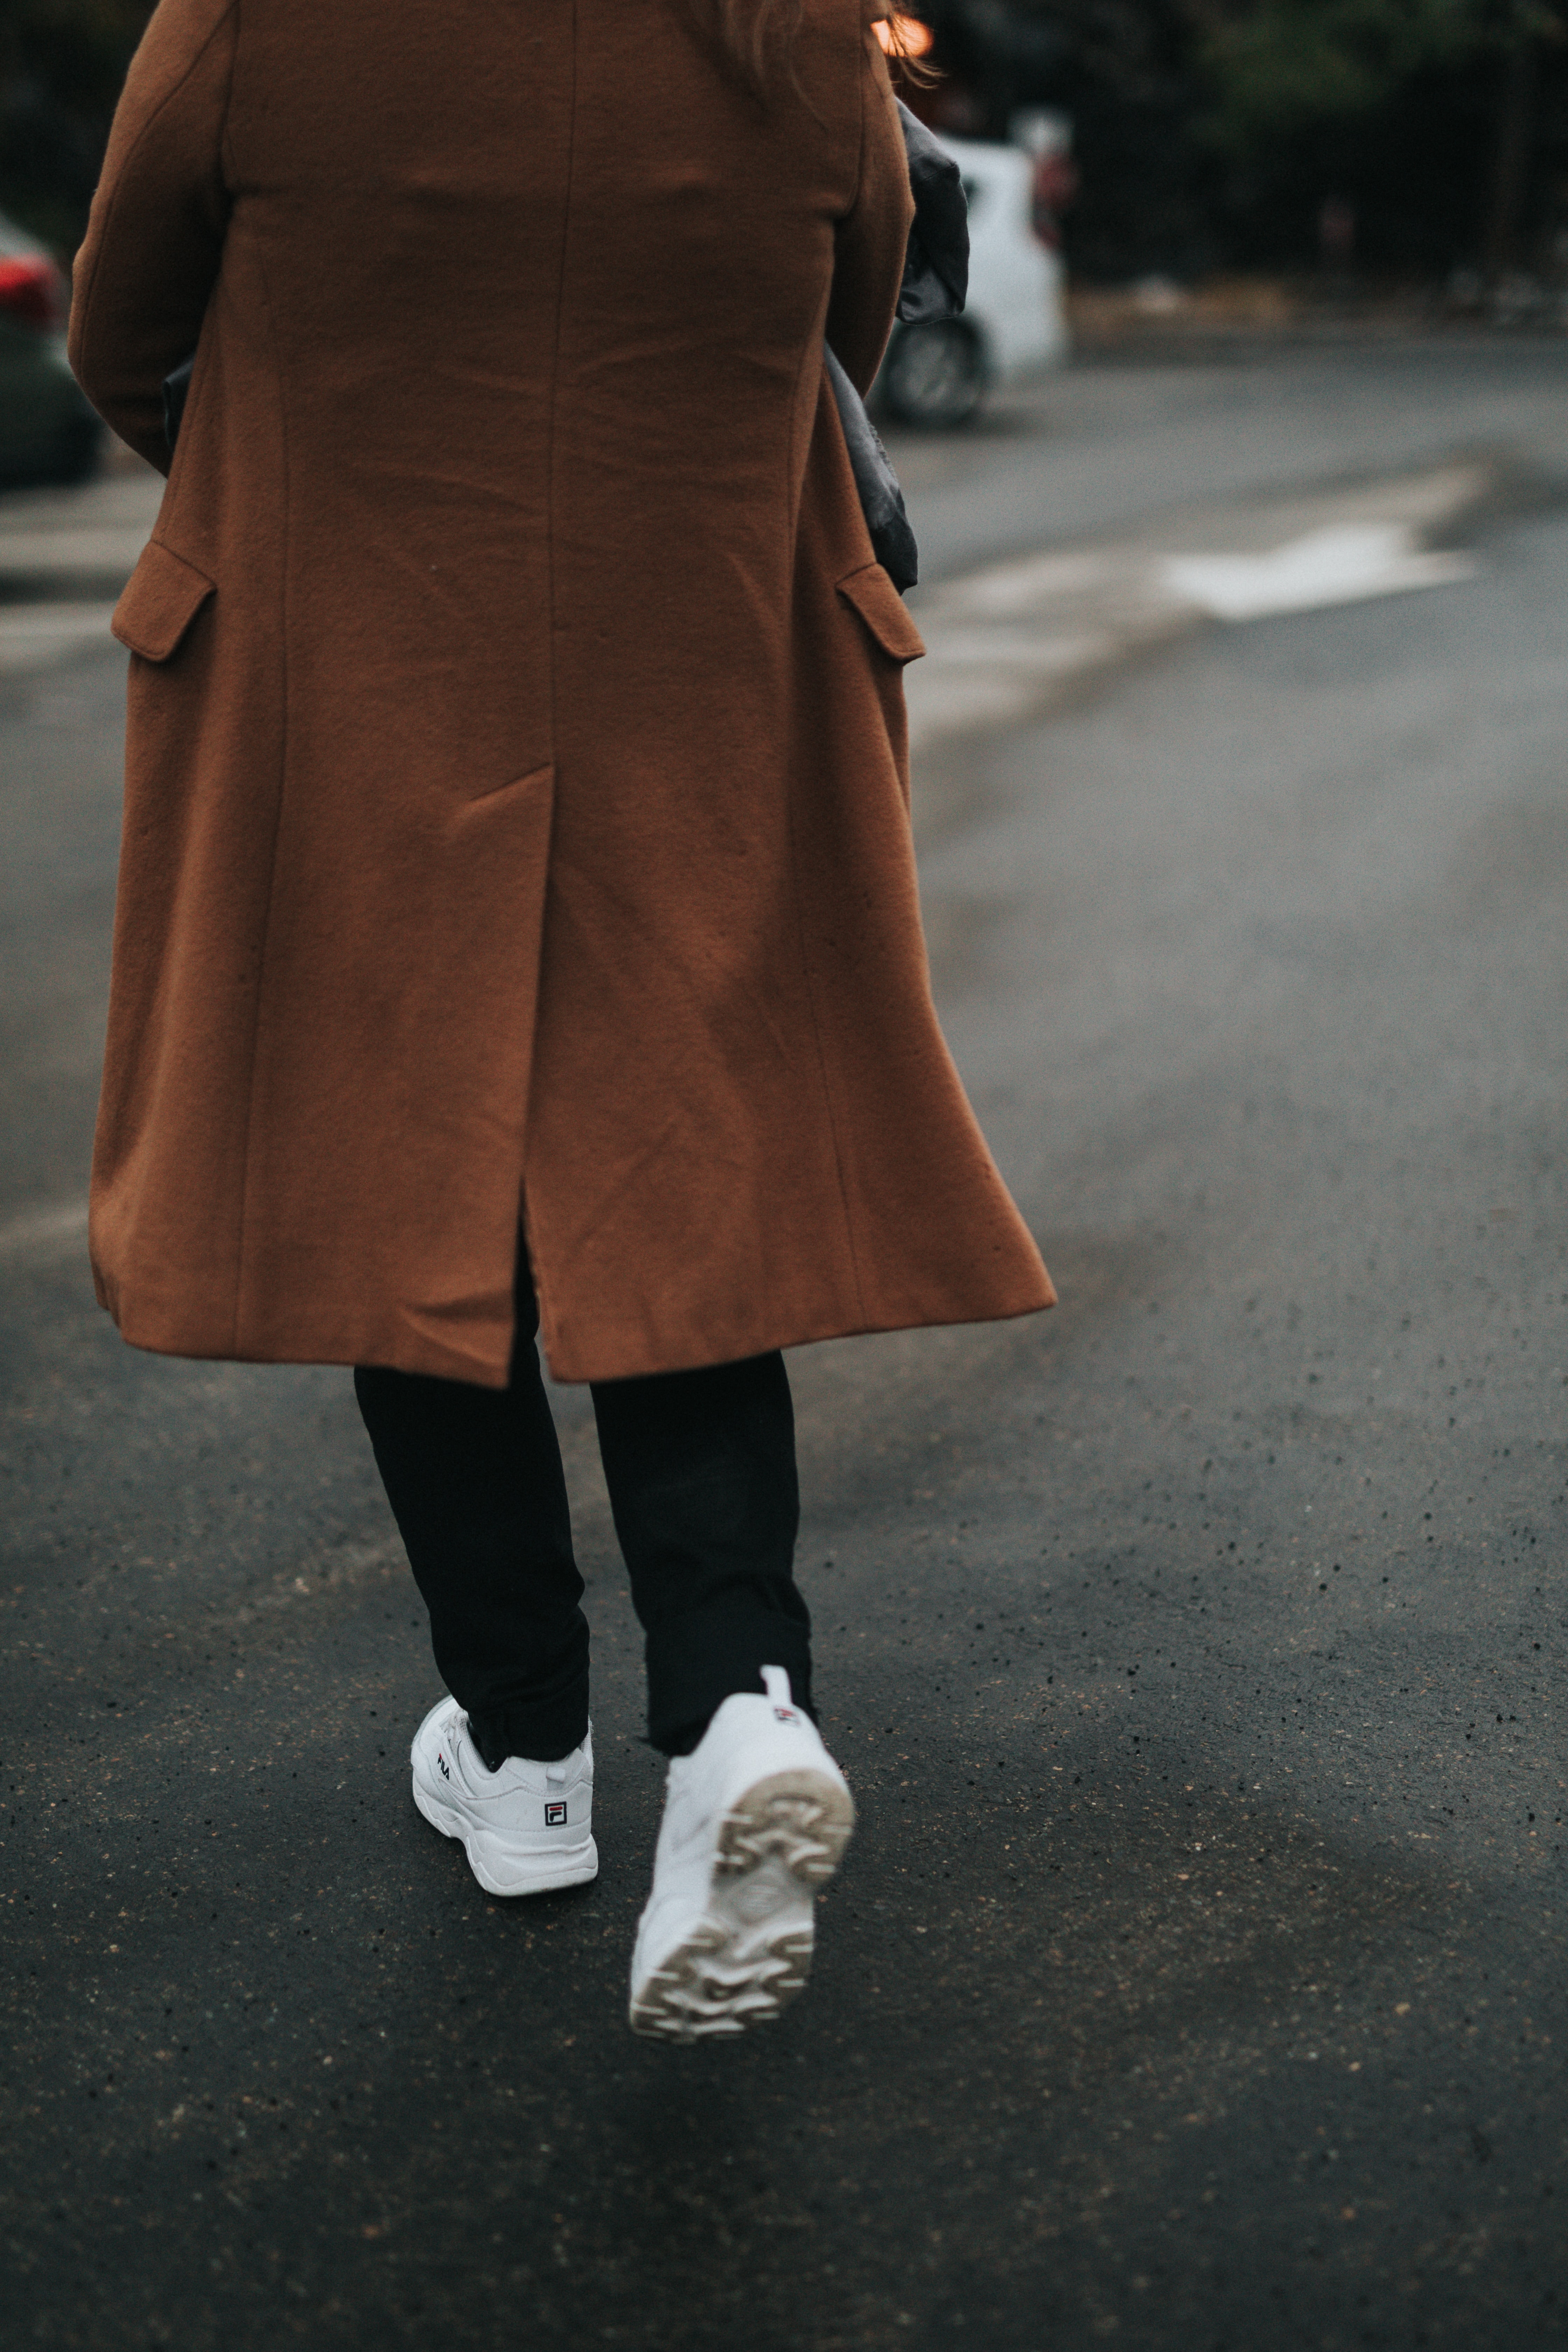 miscellanea, miscellaneous, sneakers, style, human, person, clothing, coat cellphone